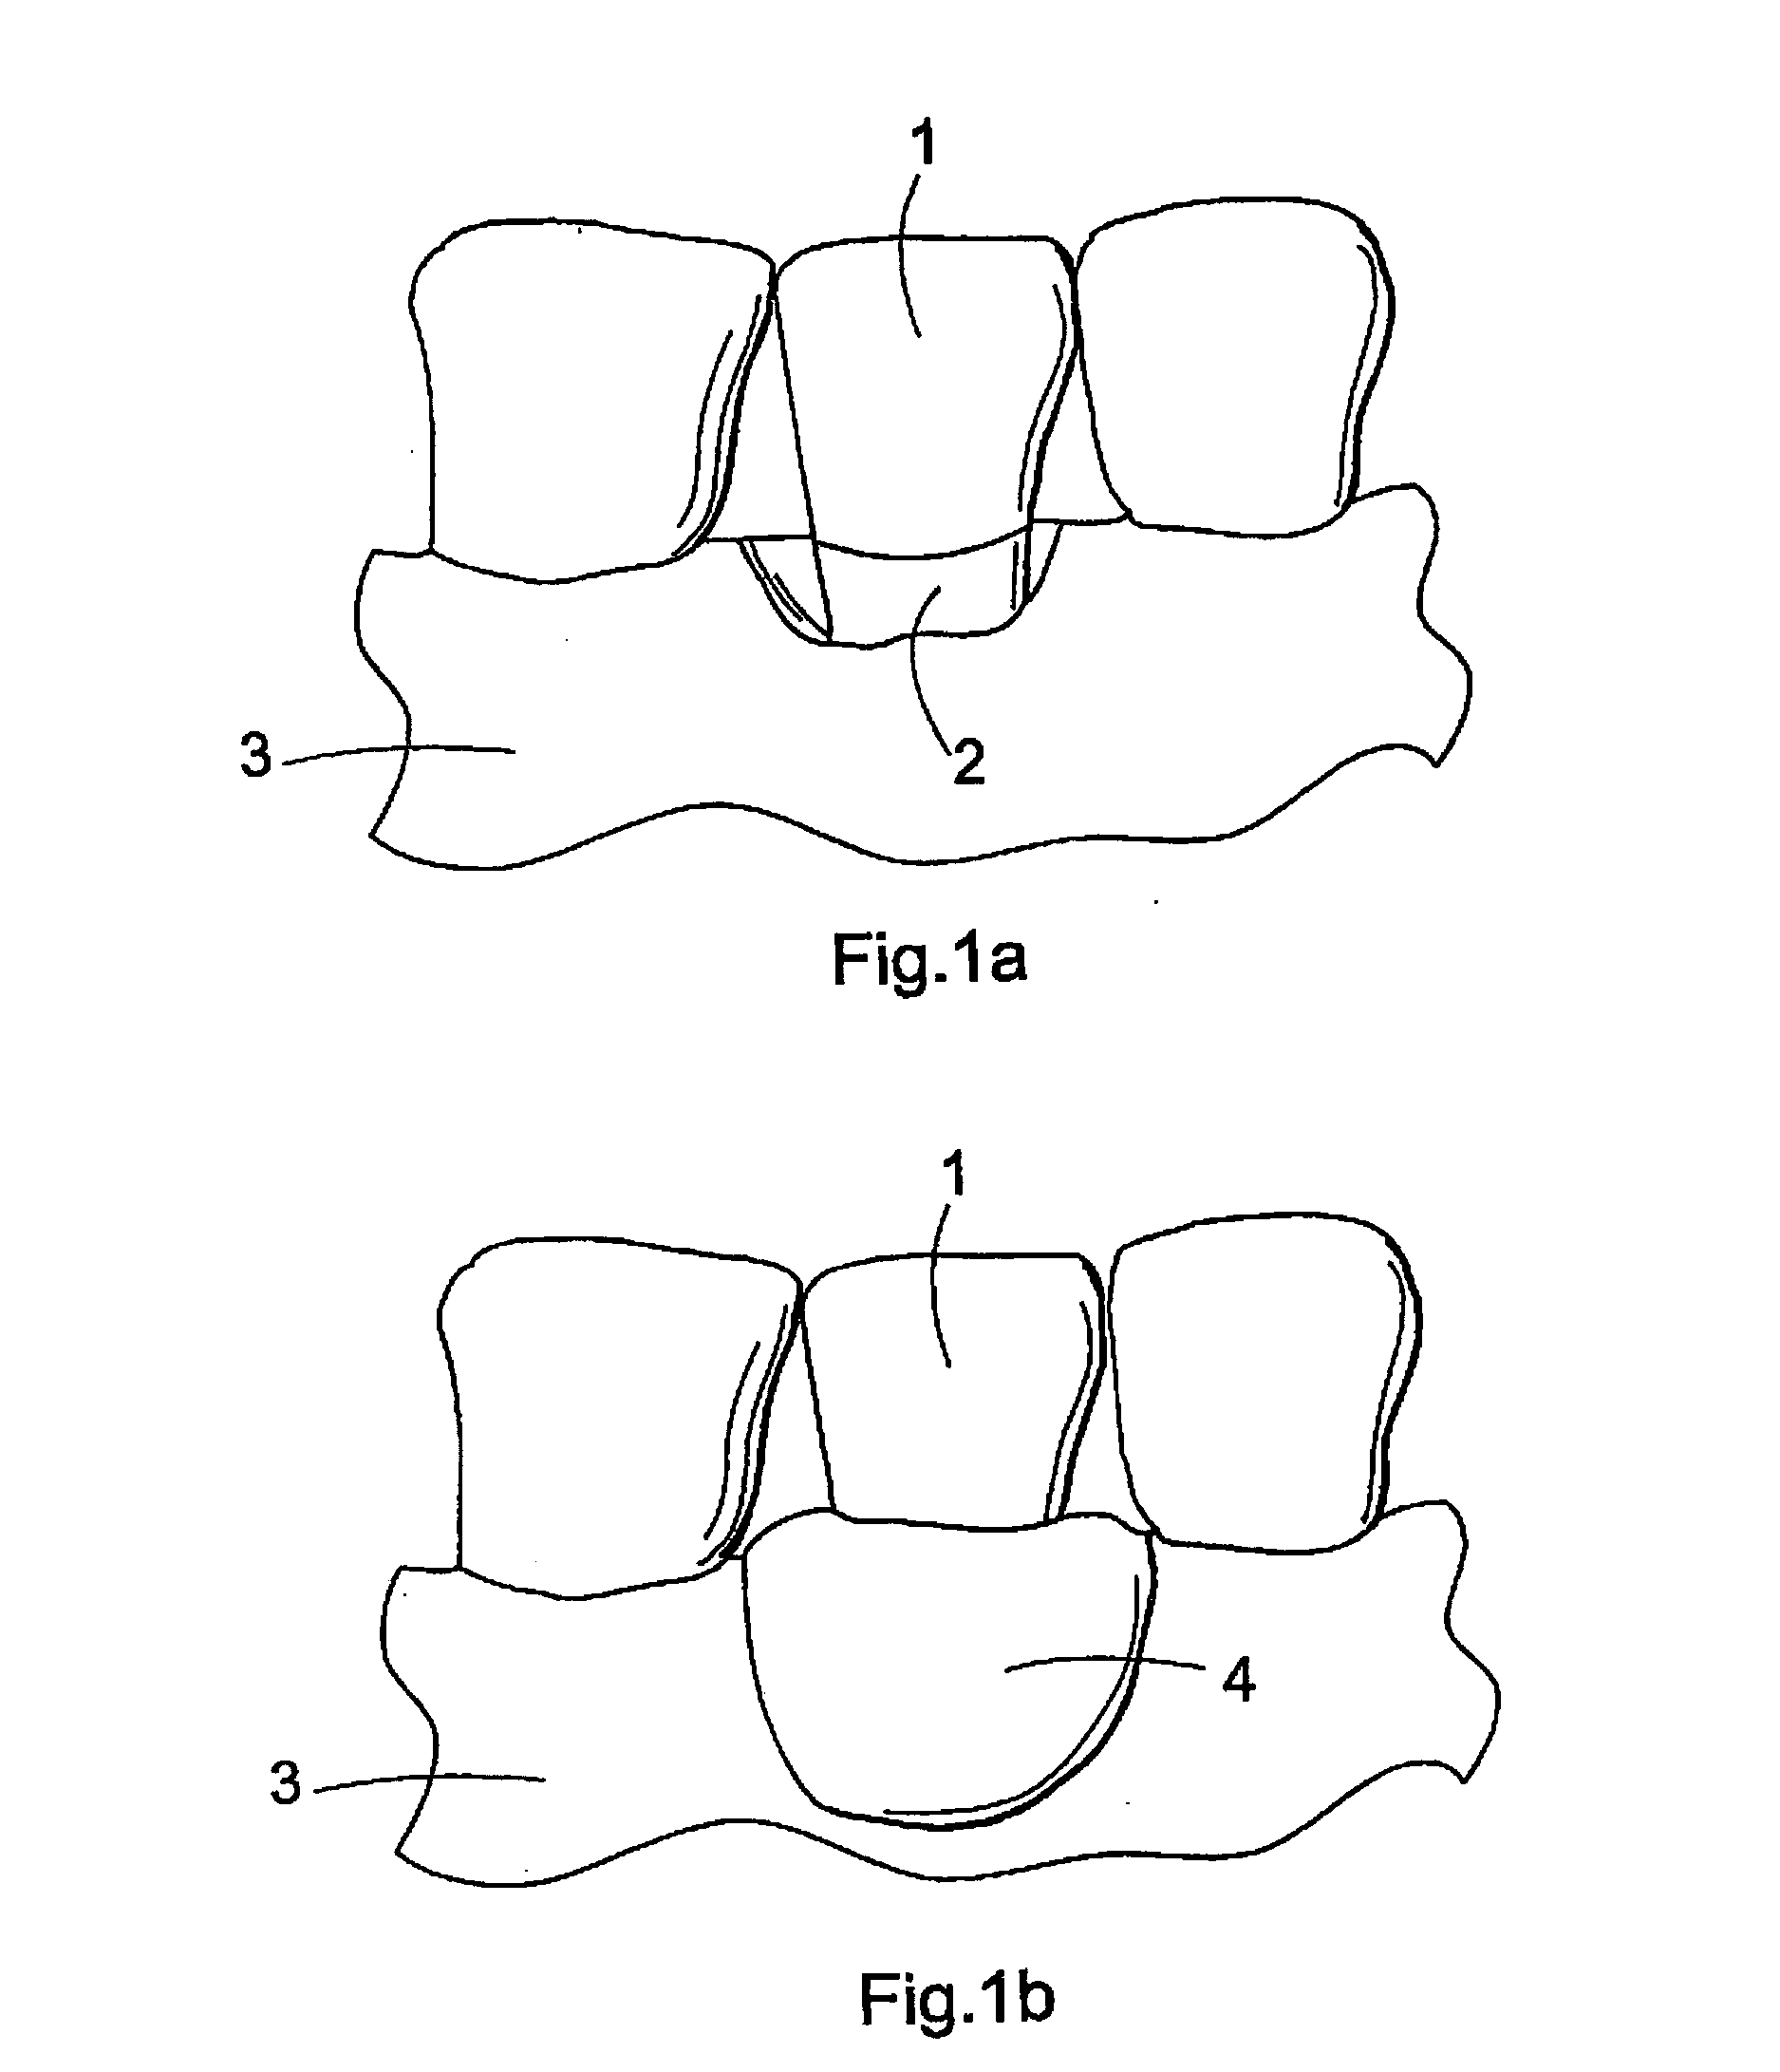 Biodegradable implant and method for manufacturing one